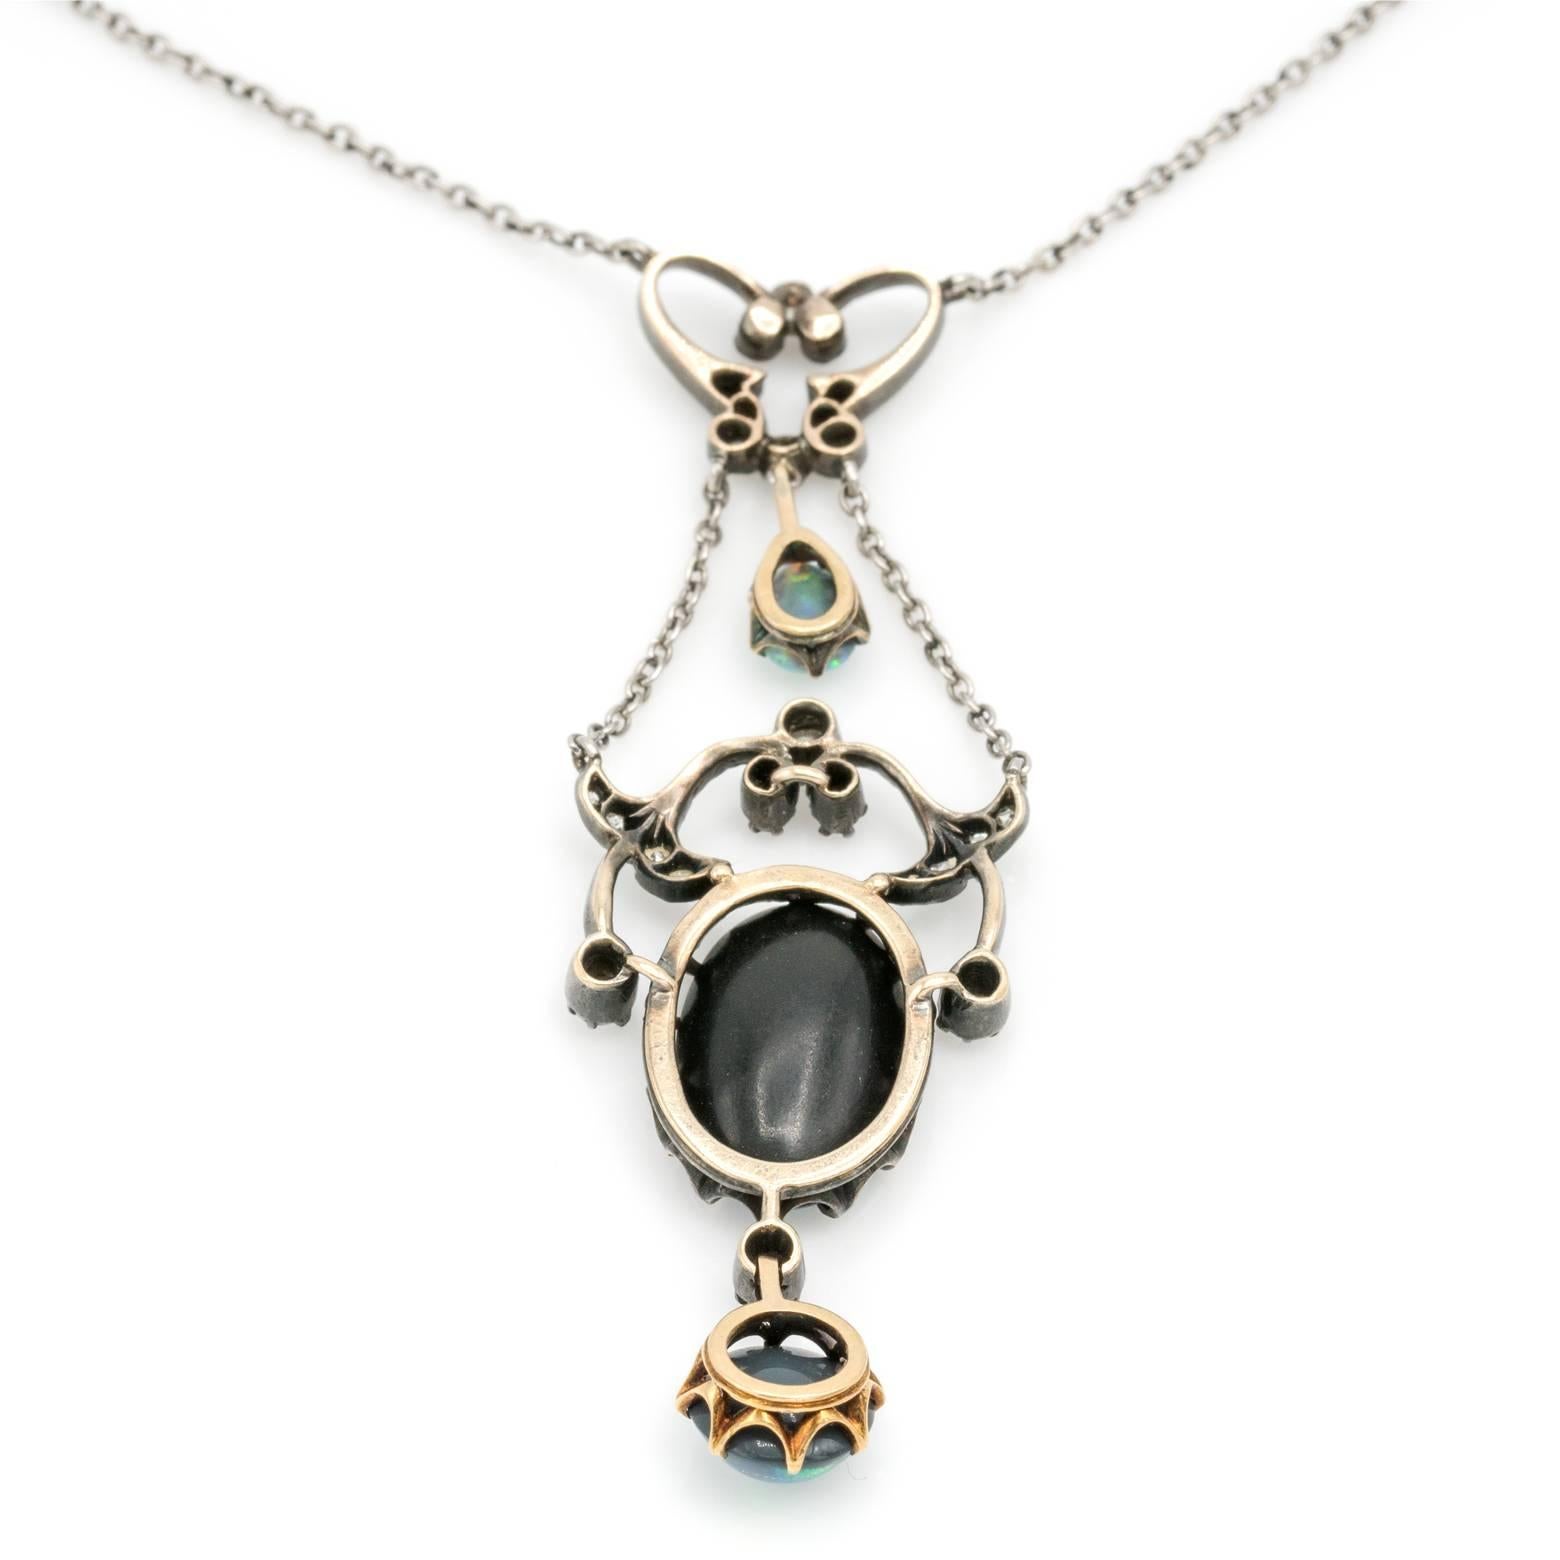 Antique from the 1880's this Edwardian multi-chain pendant 